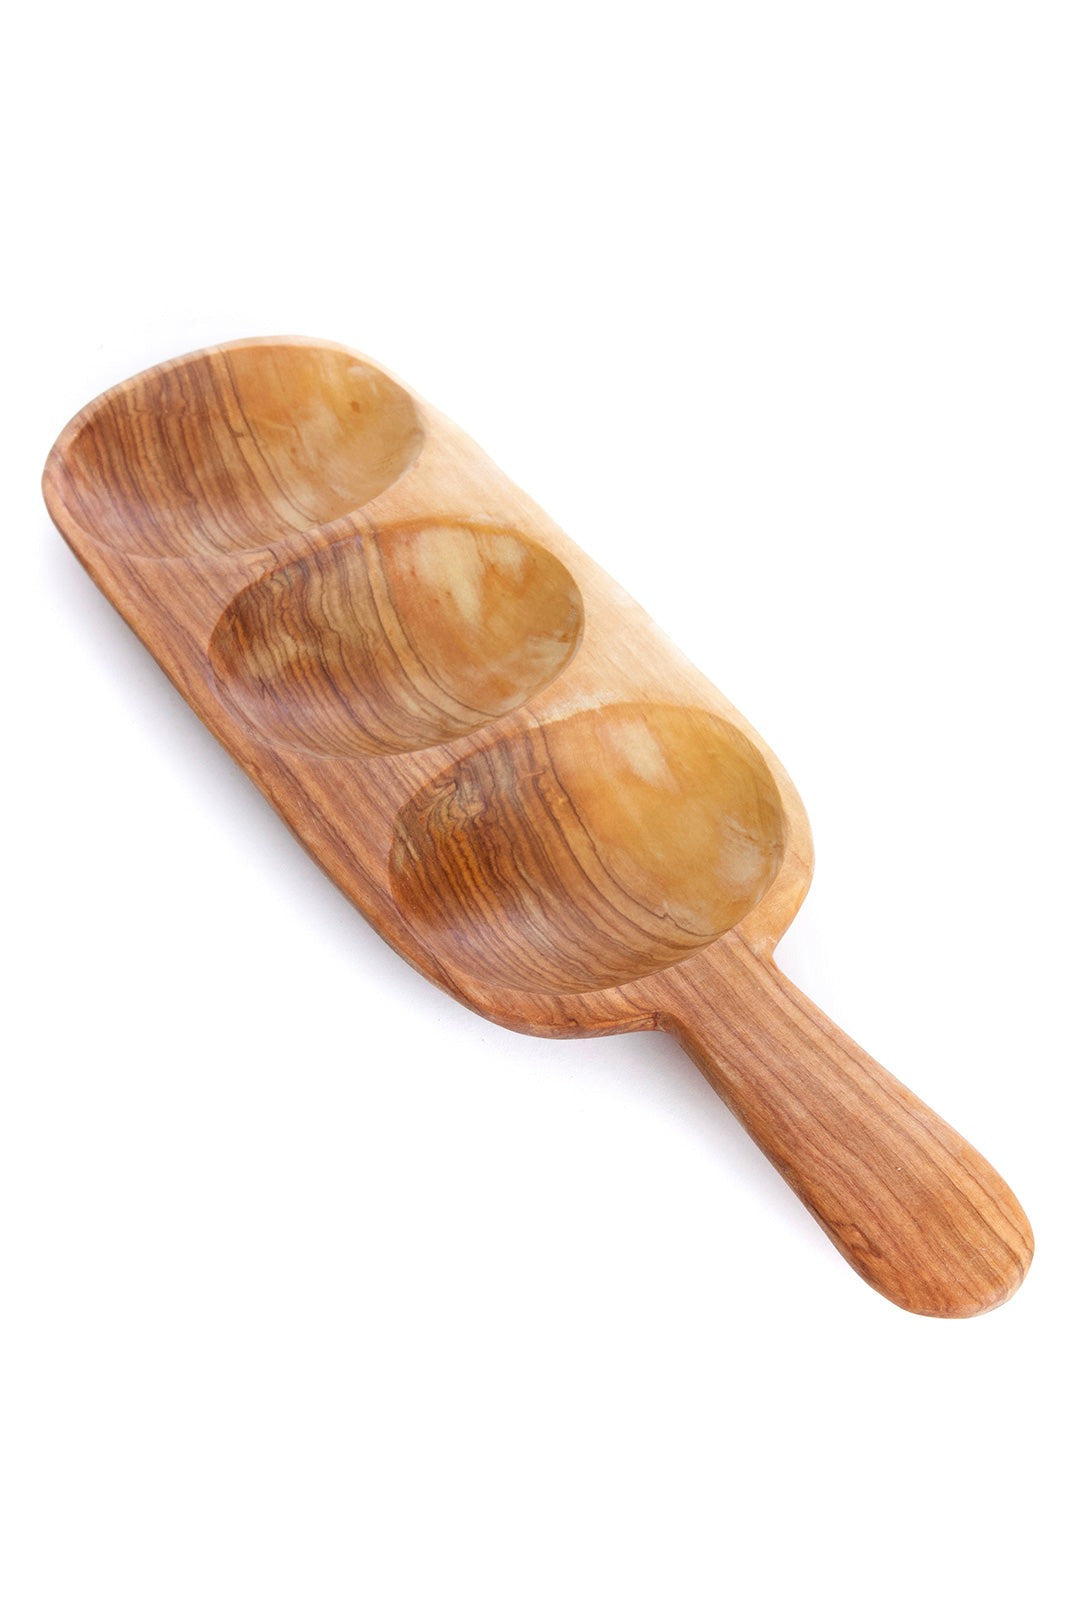 Triple Well Olive Wood Serving Tray